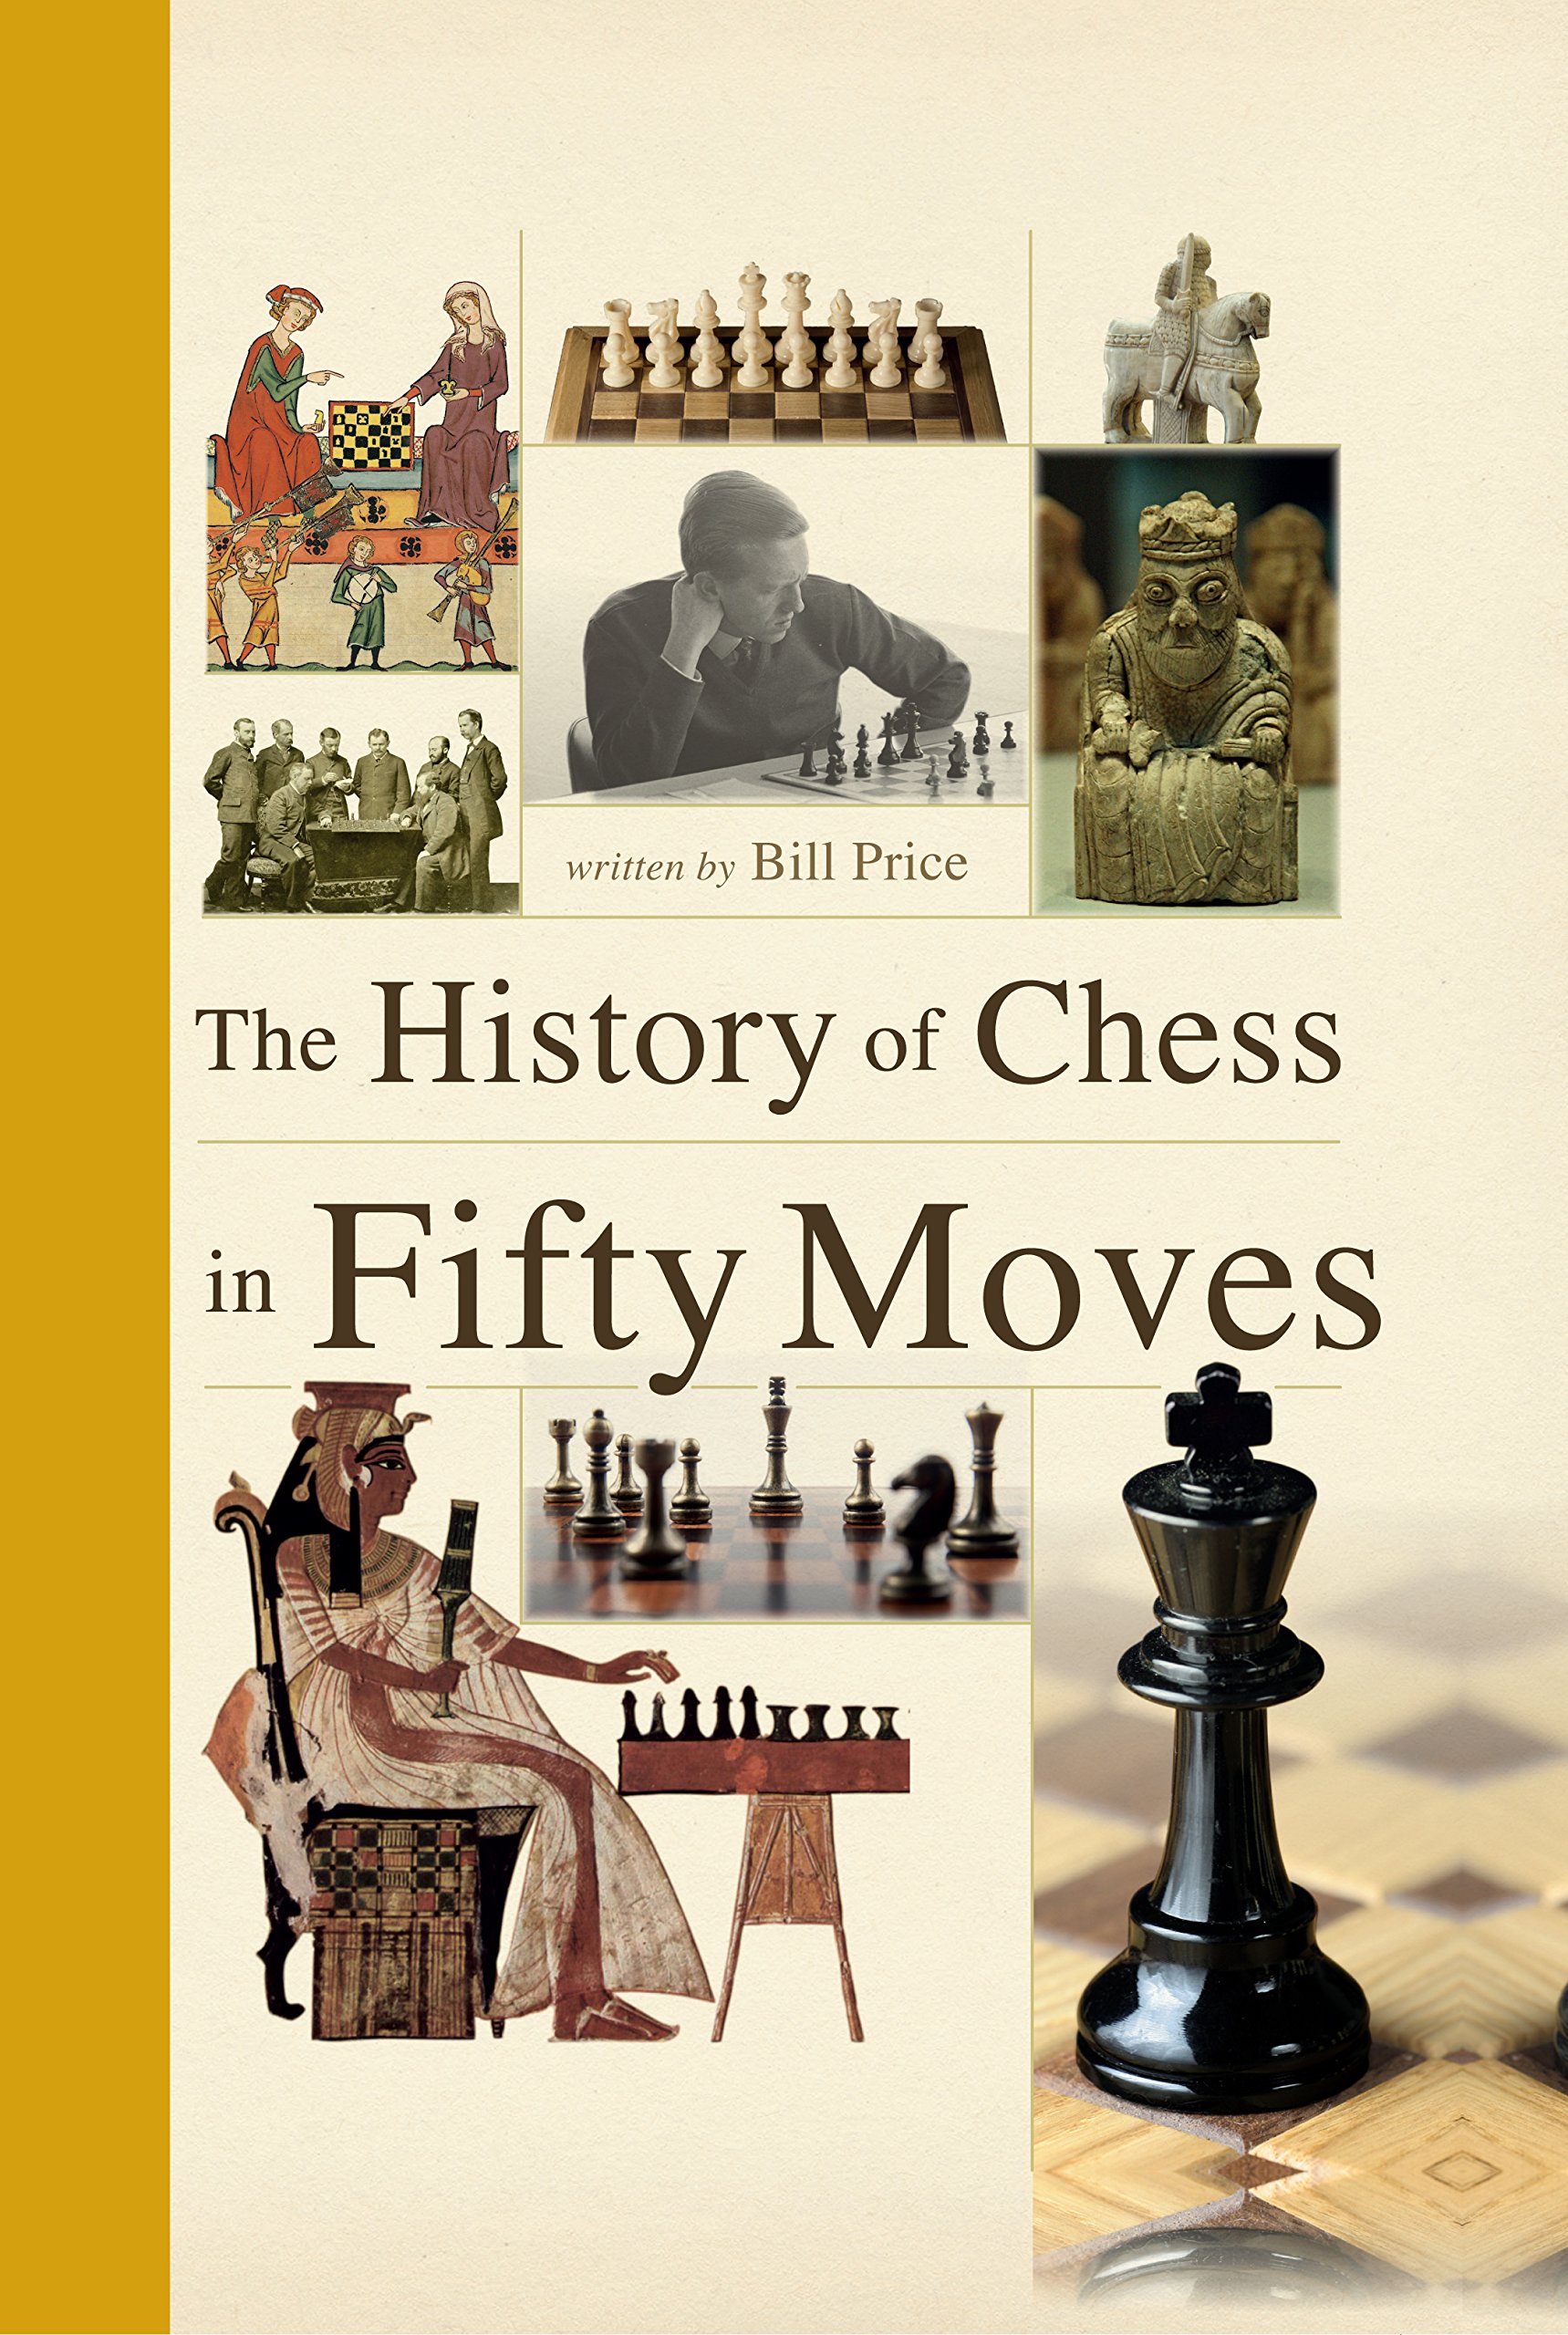 Review: The History of Chess in Fifty Moves by Bill Price